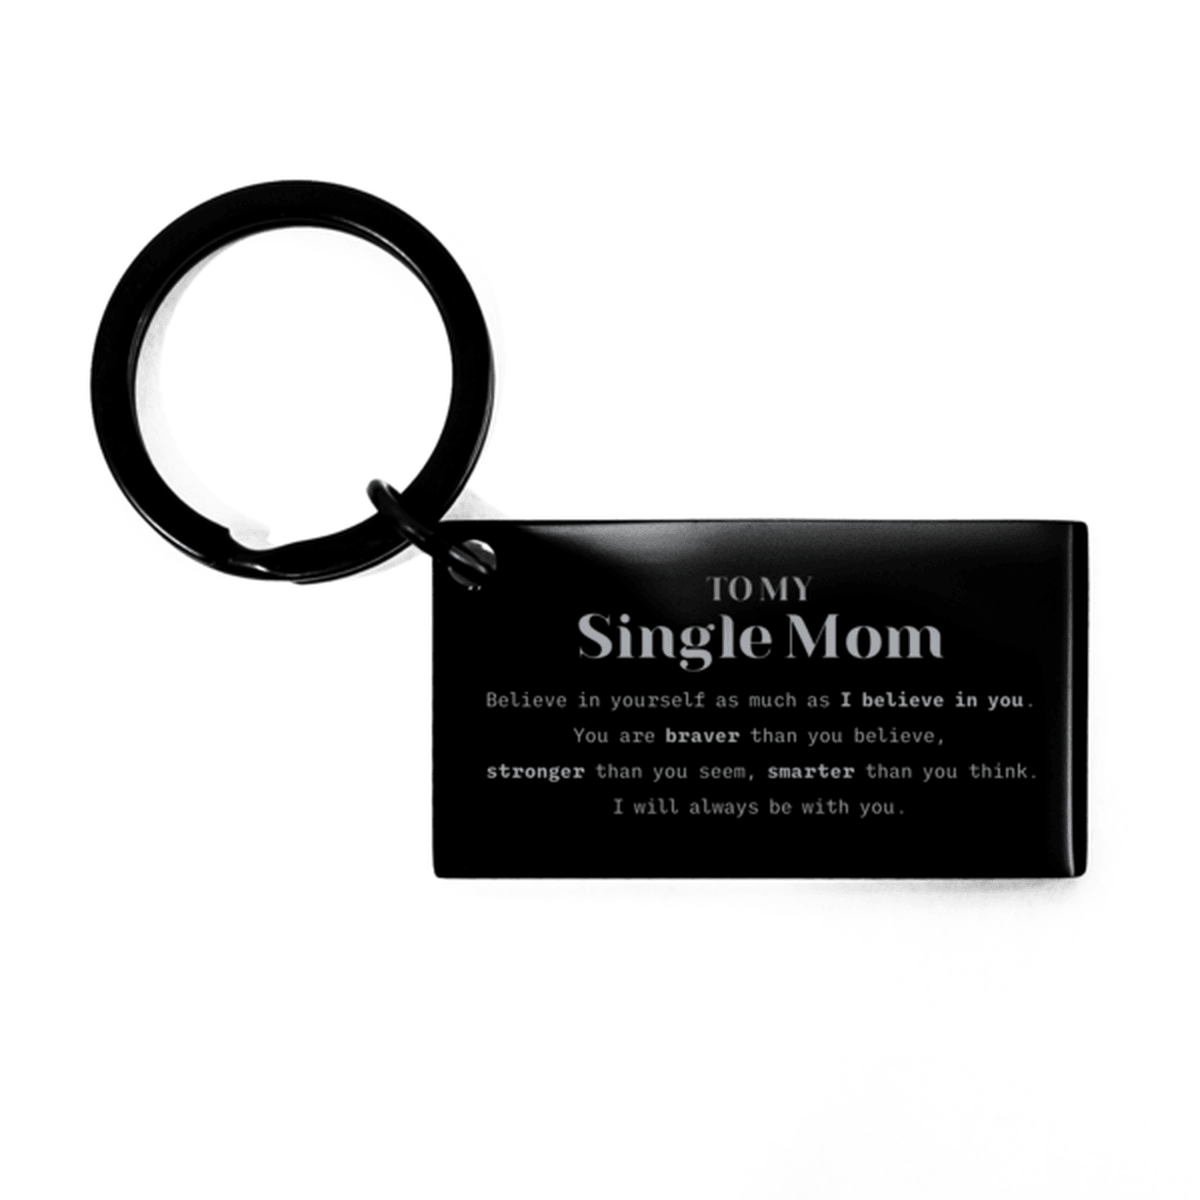 Single Mom Keychain Gifts, To My Single Mom You are braver than you believe, stronger than you seem, Inspirational Gifts For Single Mom Engraved, Birthday, Christmas Gifts For Single Mom Men Women